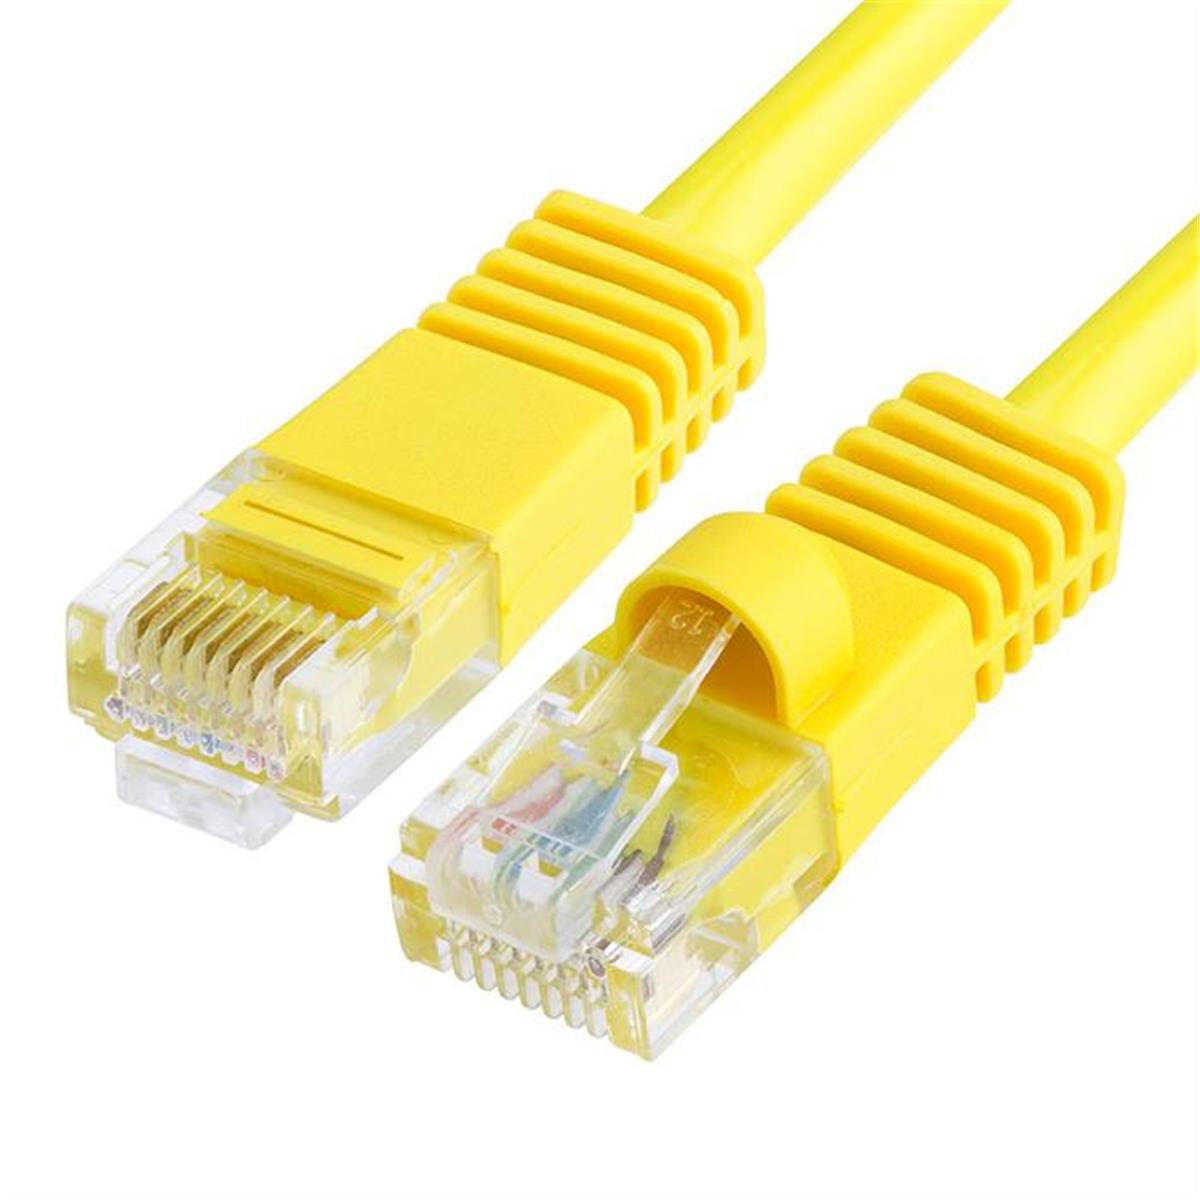 873-n 350 Mhz Rj45 Cat5e Ethernet Network Patch Cable - 7 Ft. - Yellow